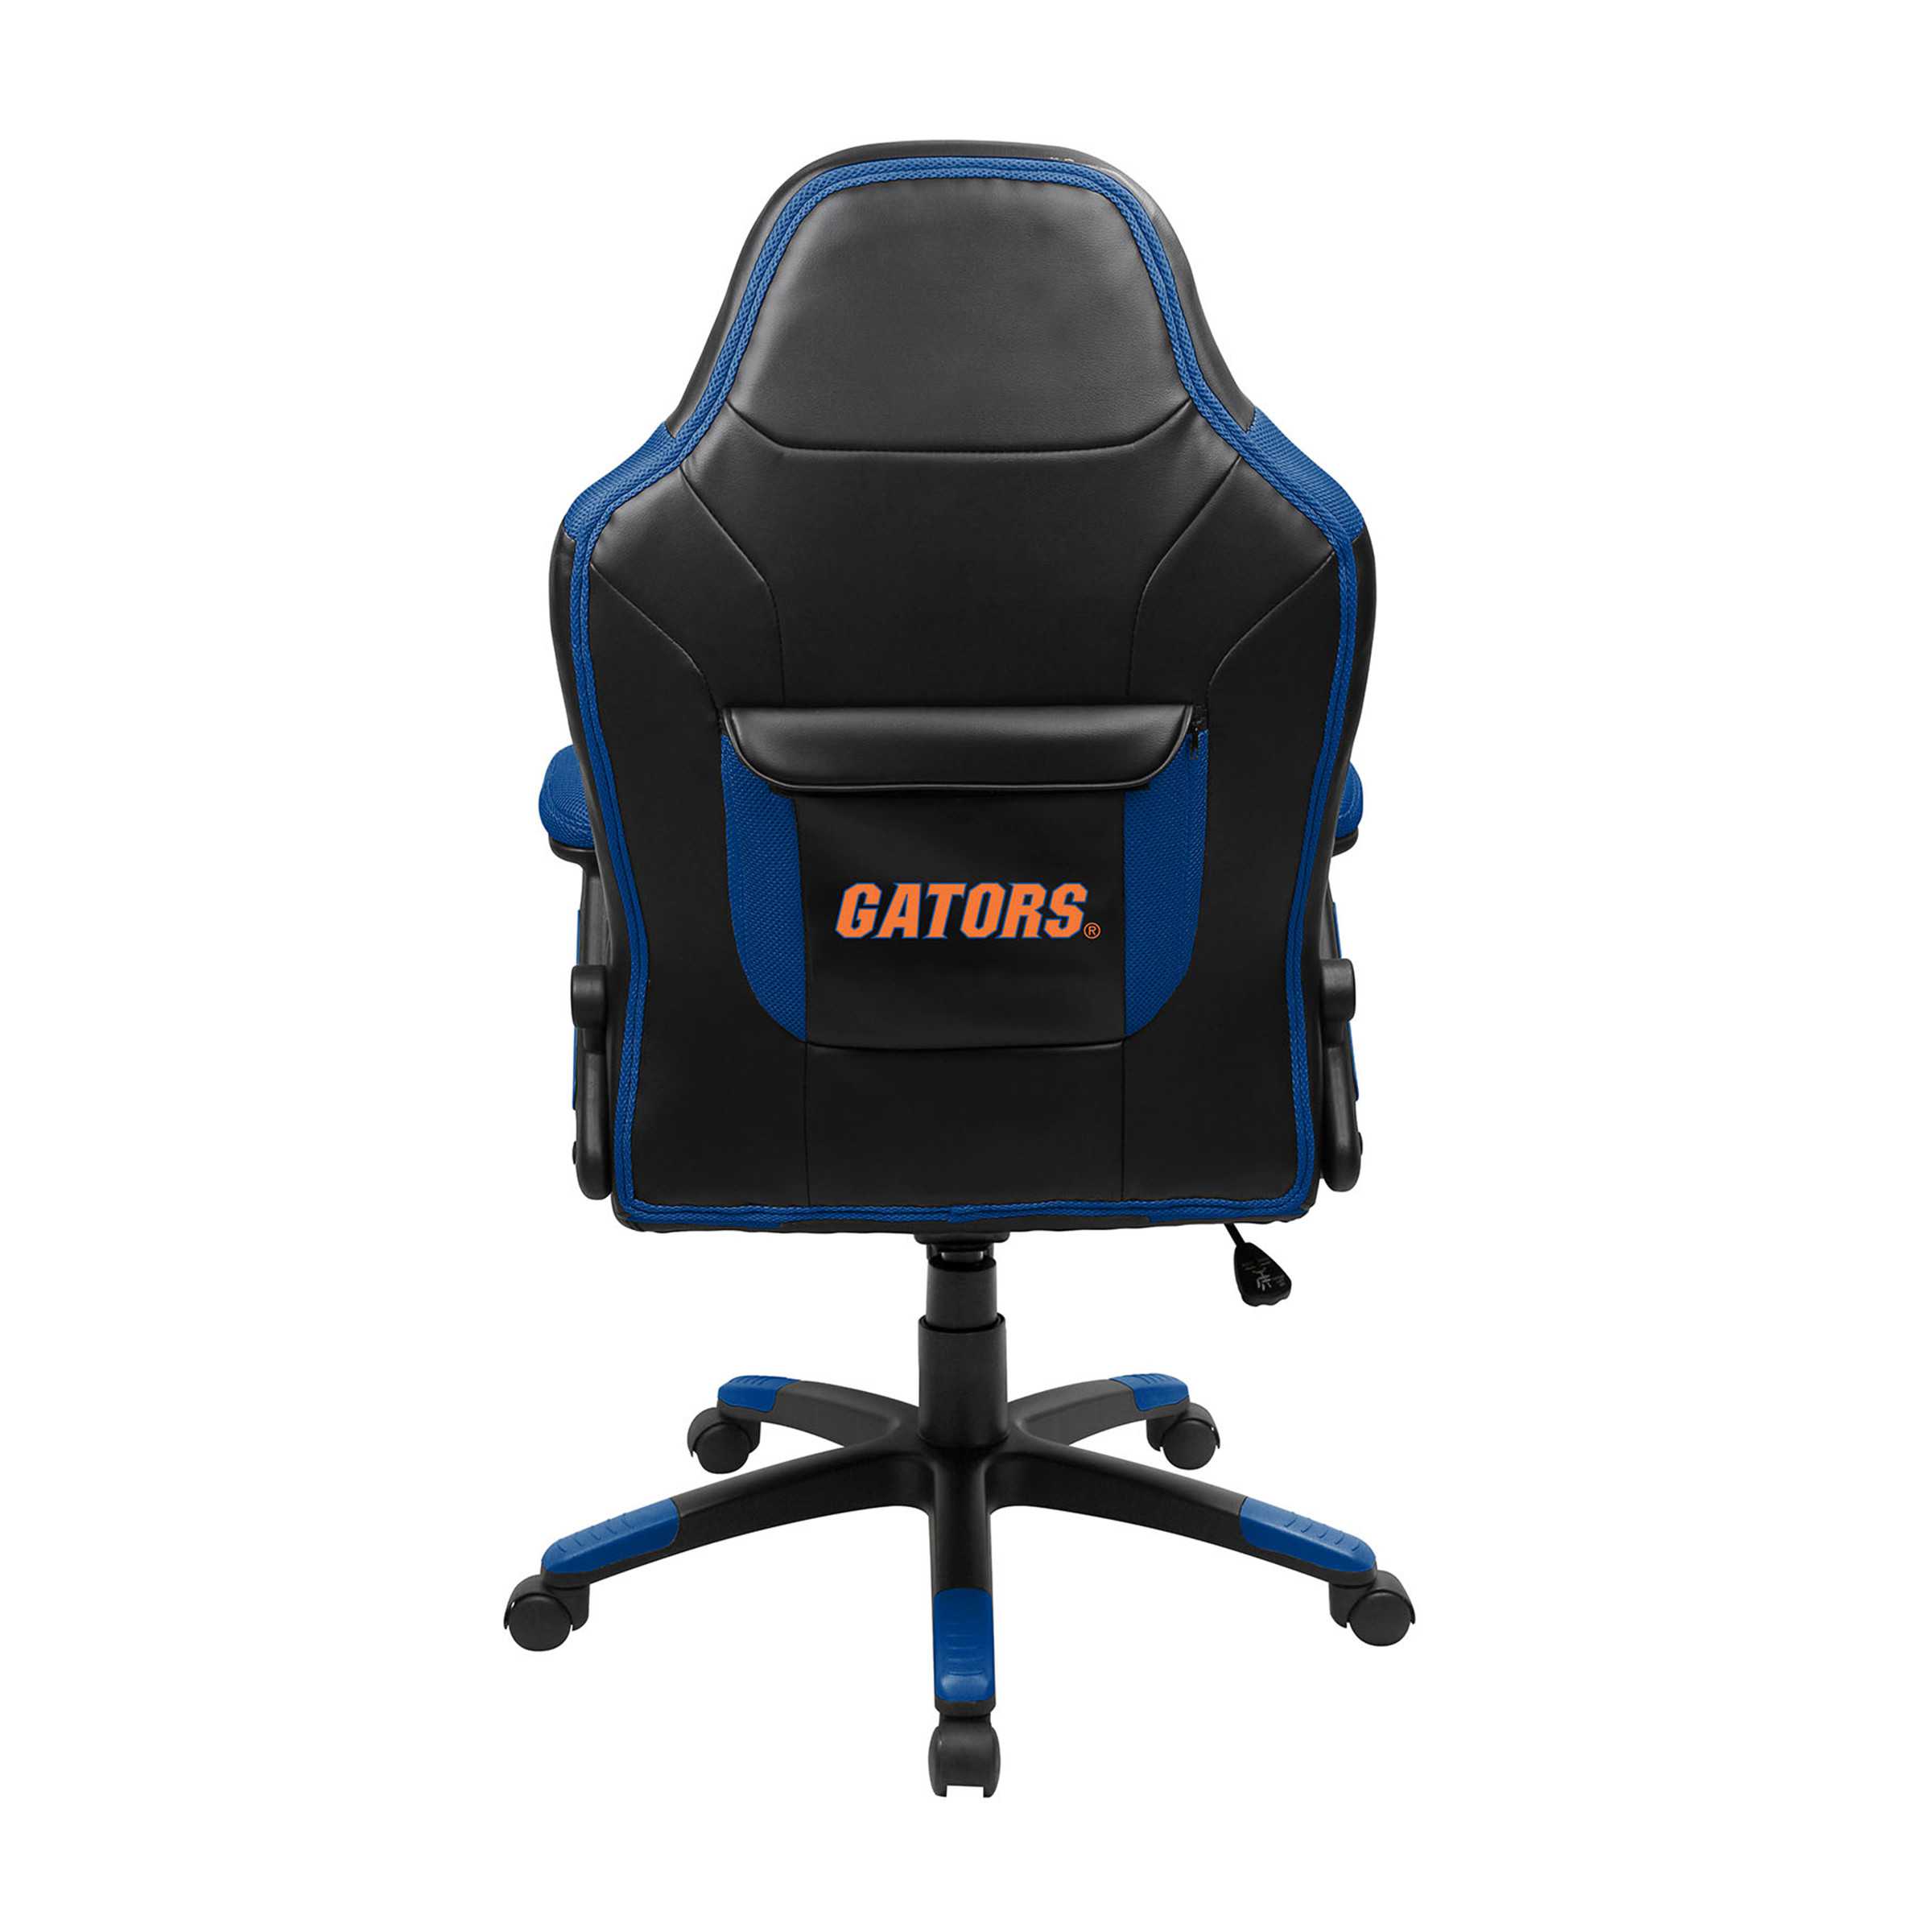 UNIVERSITY OF FLORIDA OVERSIZED GAMING CHAIR